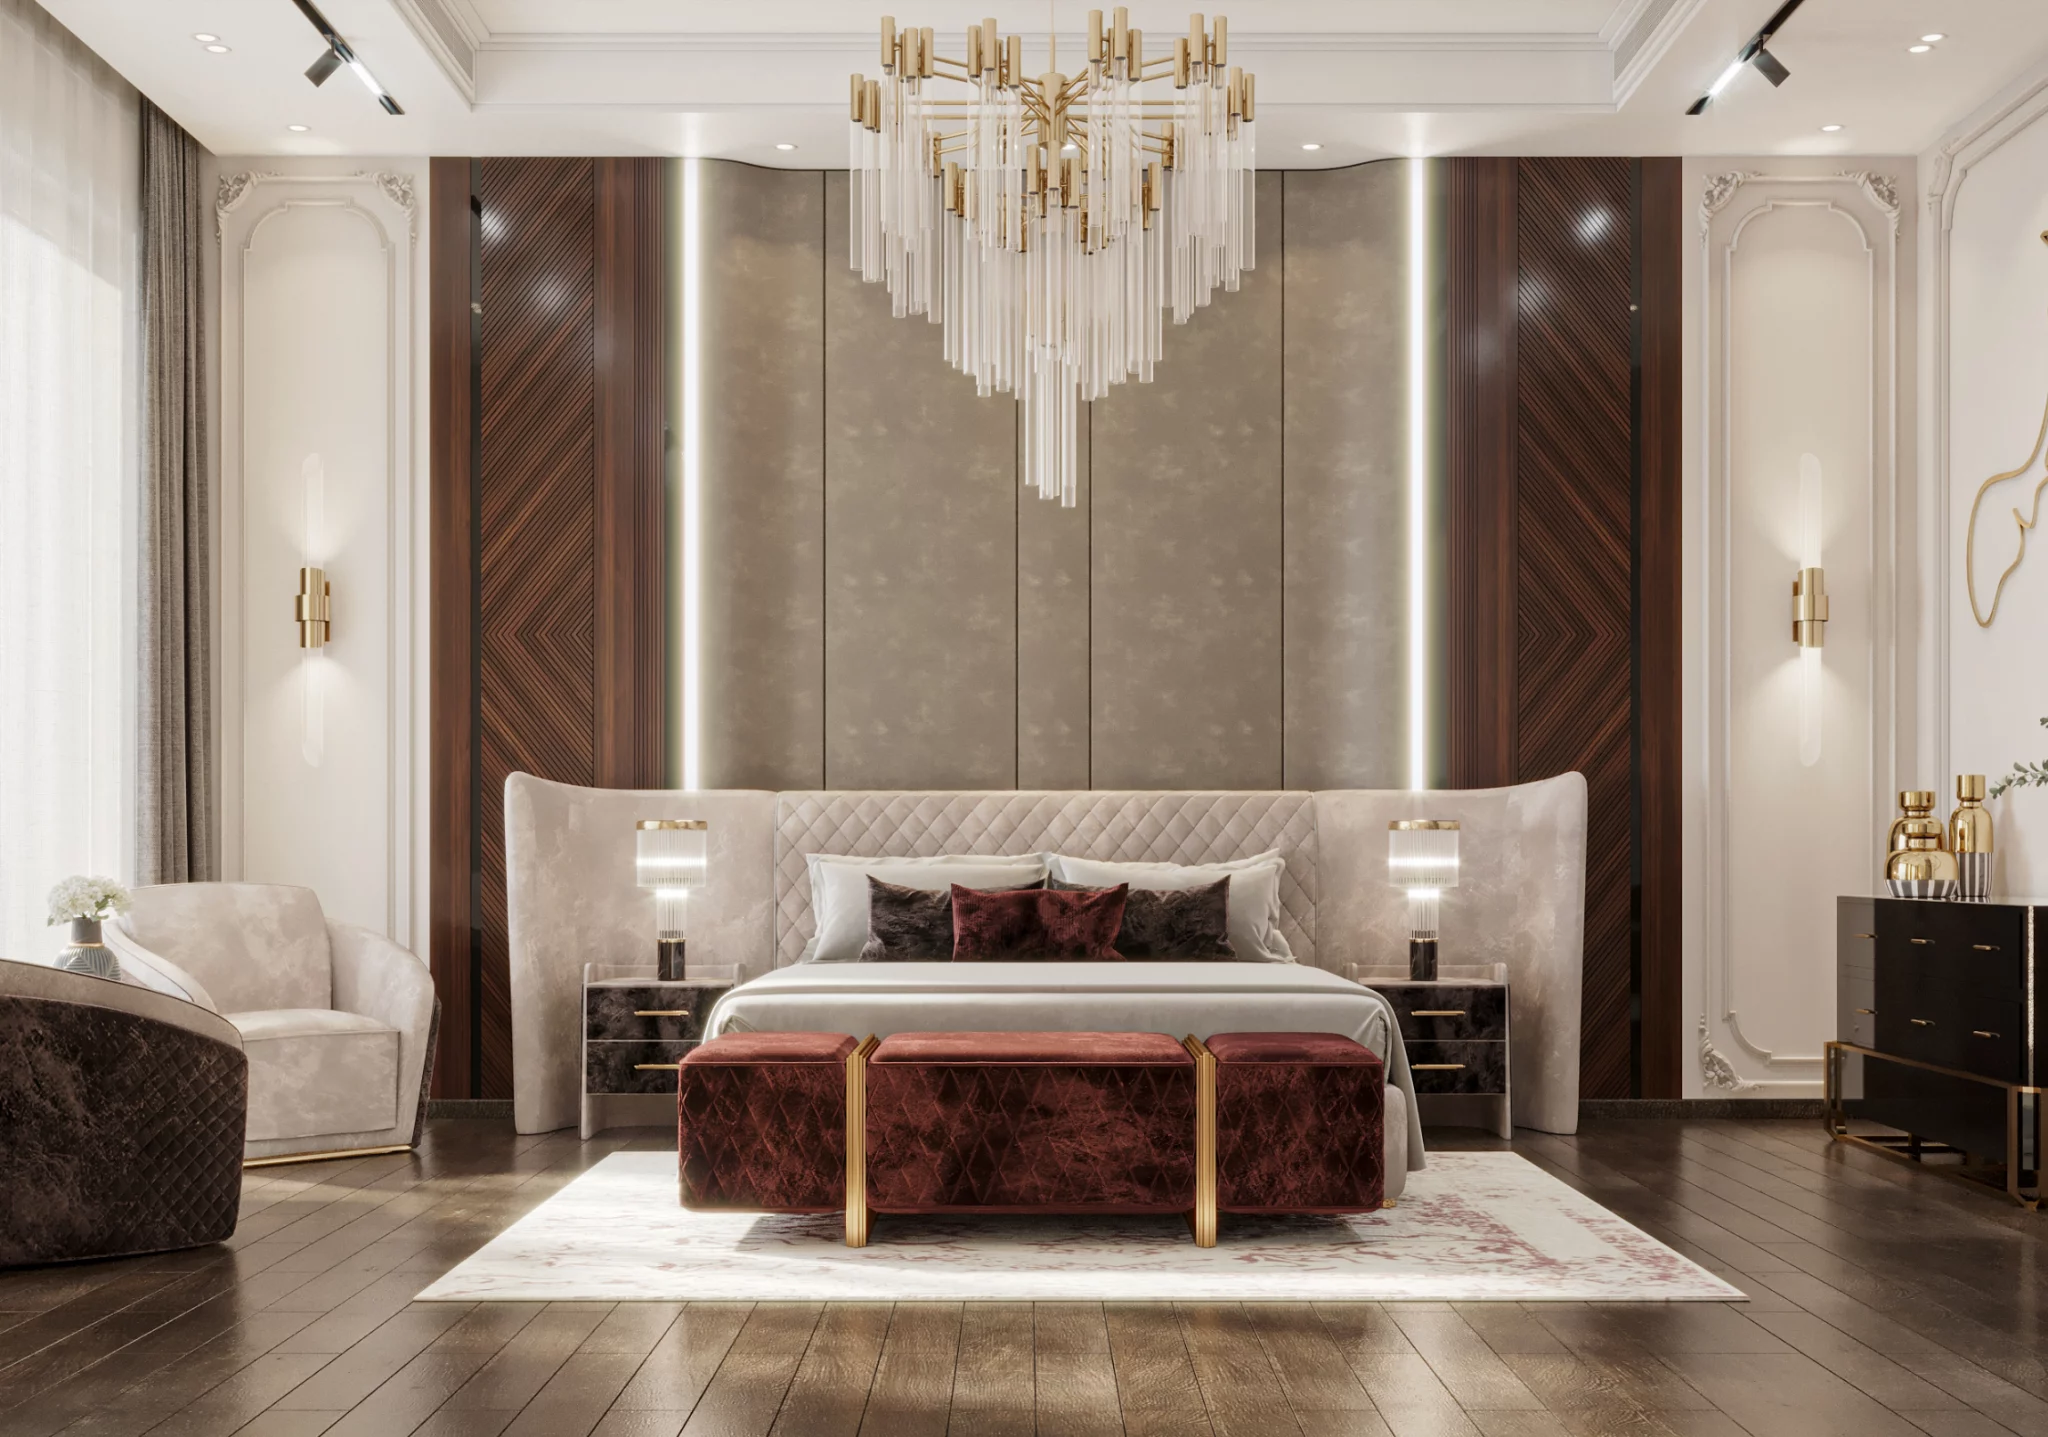 Top more than 133 luxury bedroom decorating ideas super hot - noithatsi.vn